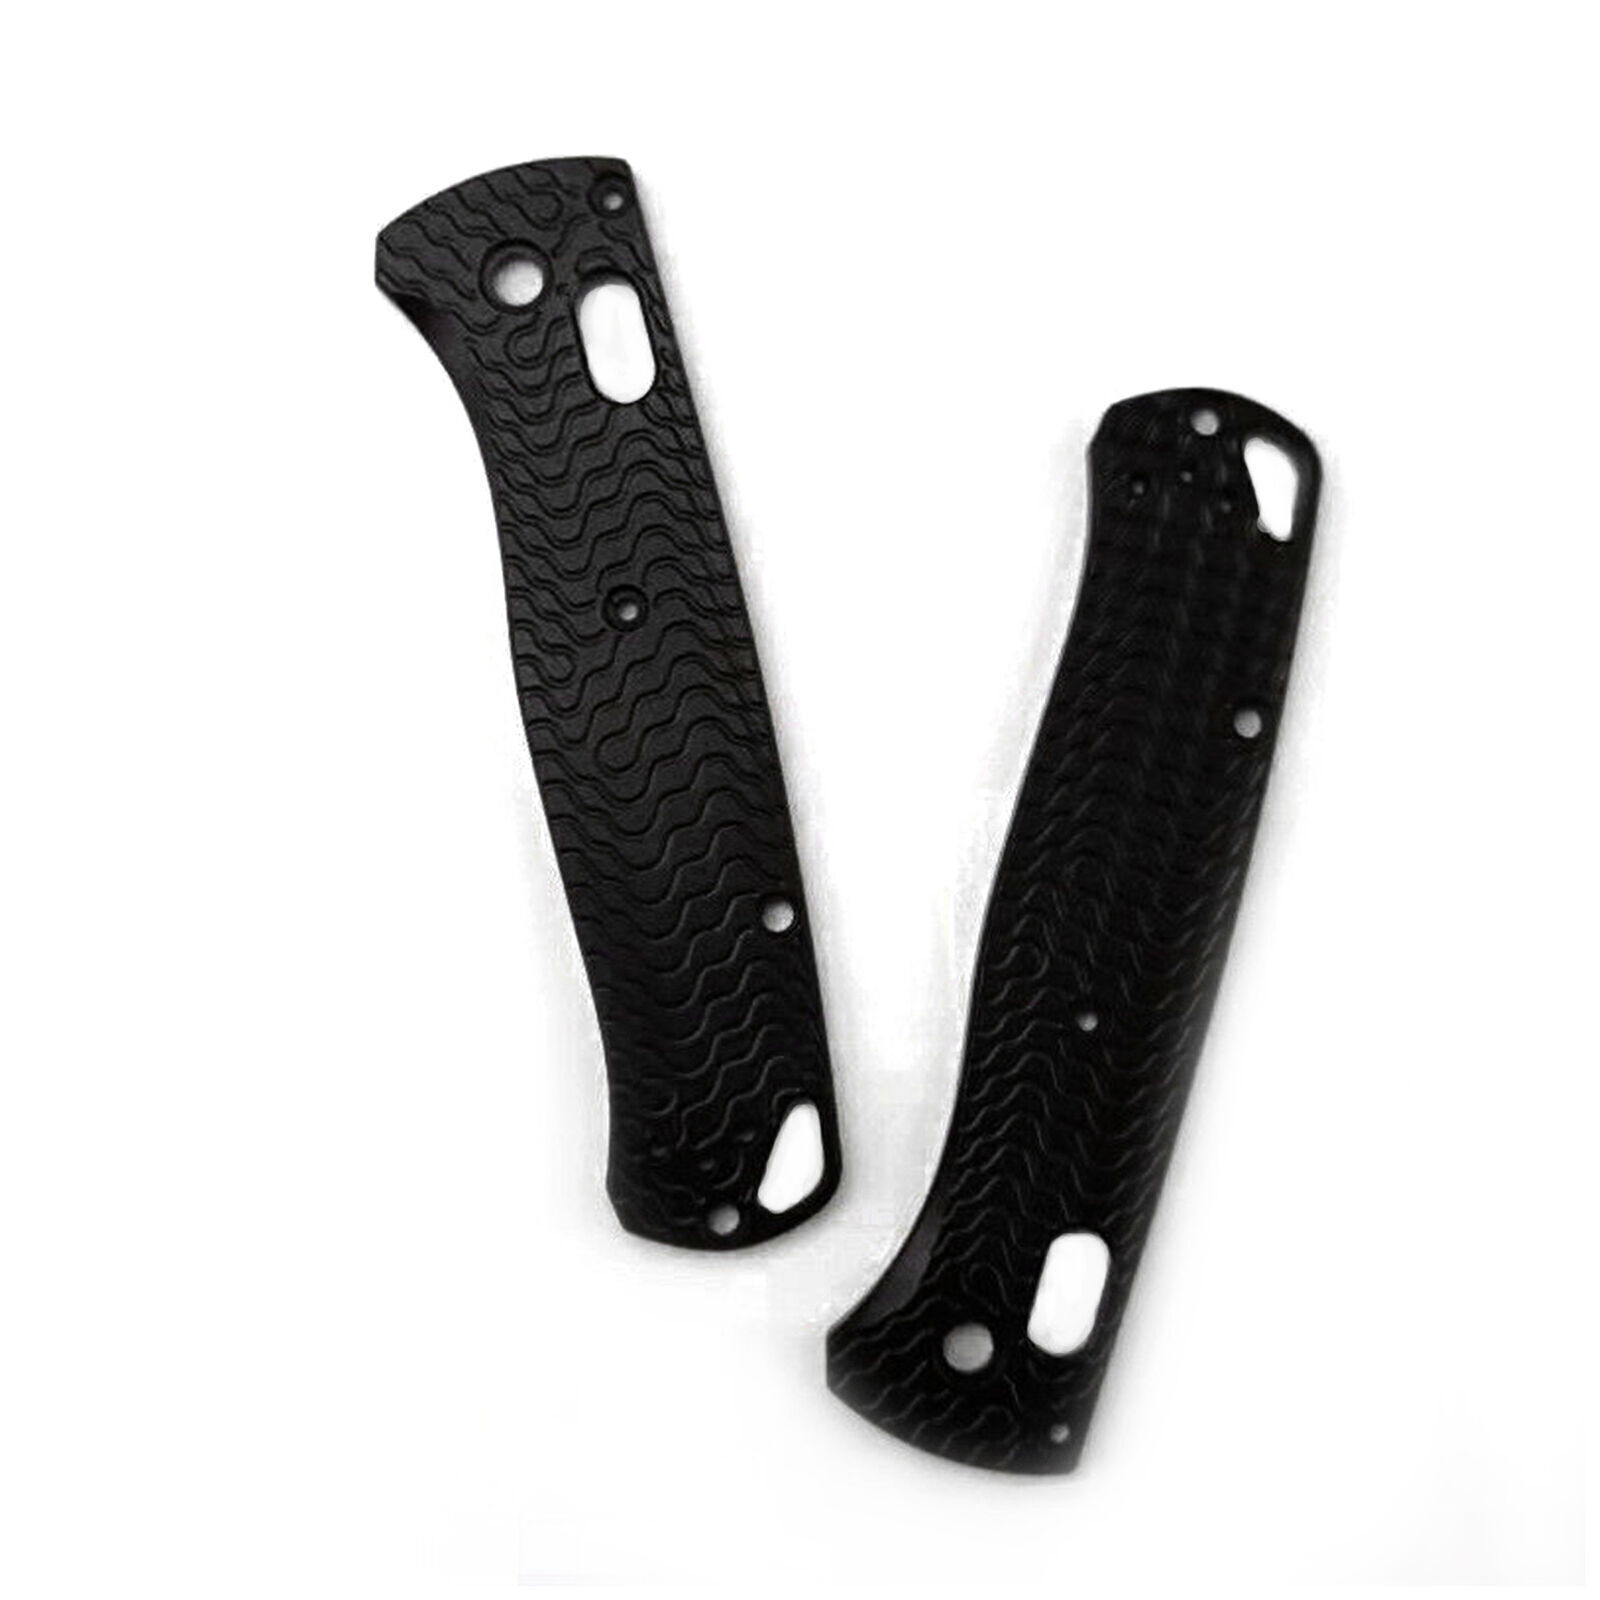 2x Black Brushed Custom Aluminium Alloy Scales Stripes For Benchmade Bugout 535